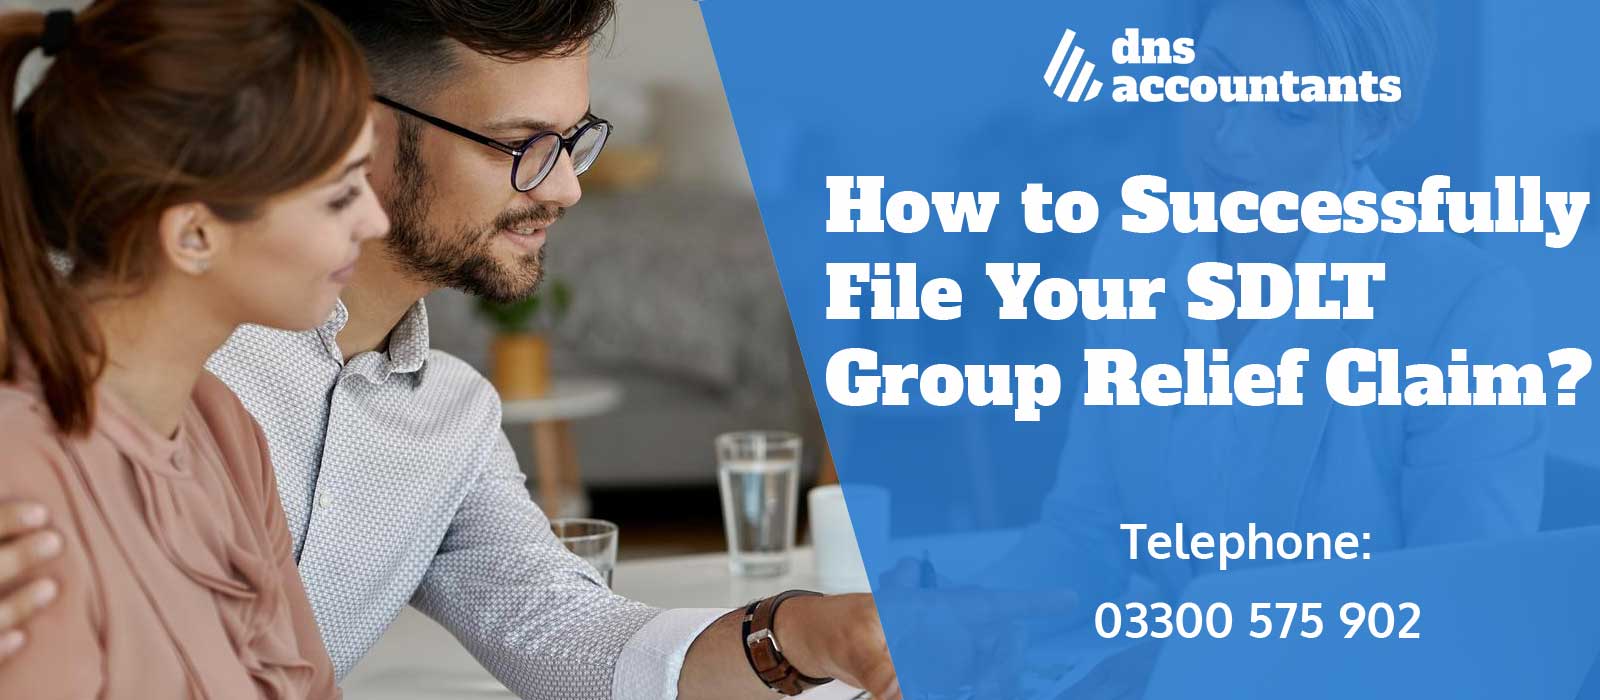 How to Successfully File Your SDLT Group Relief Claim?